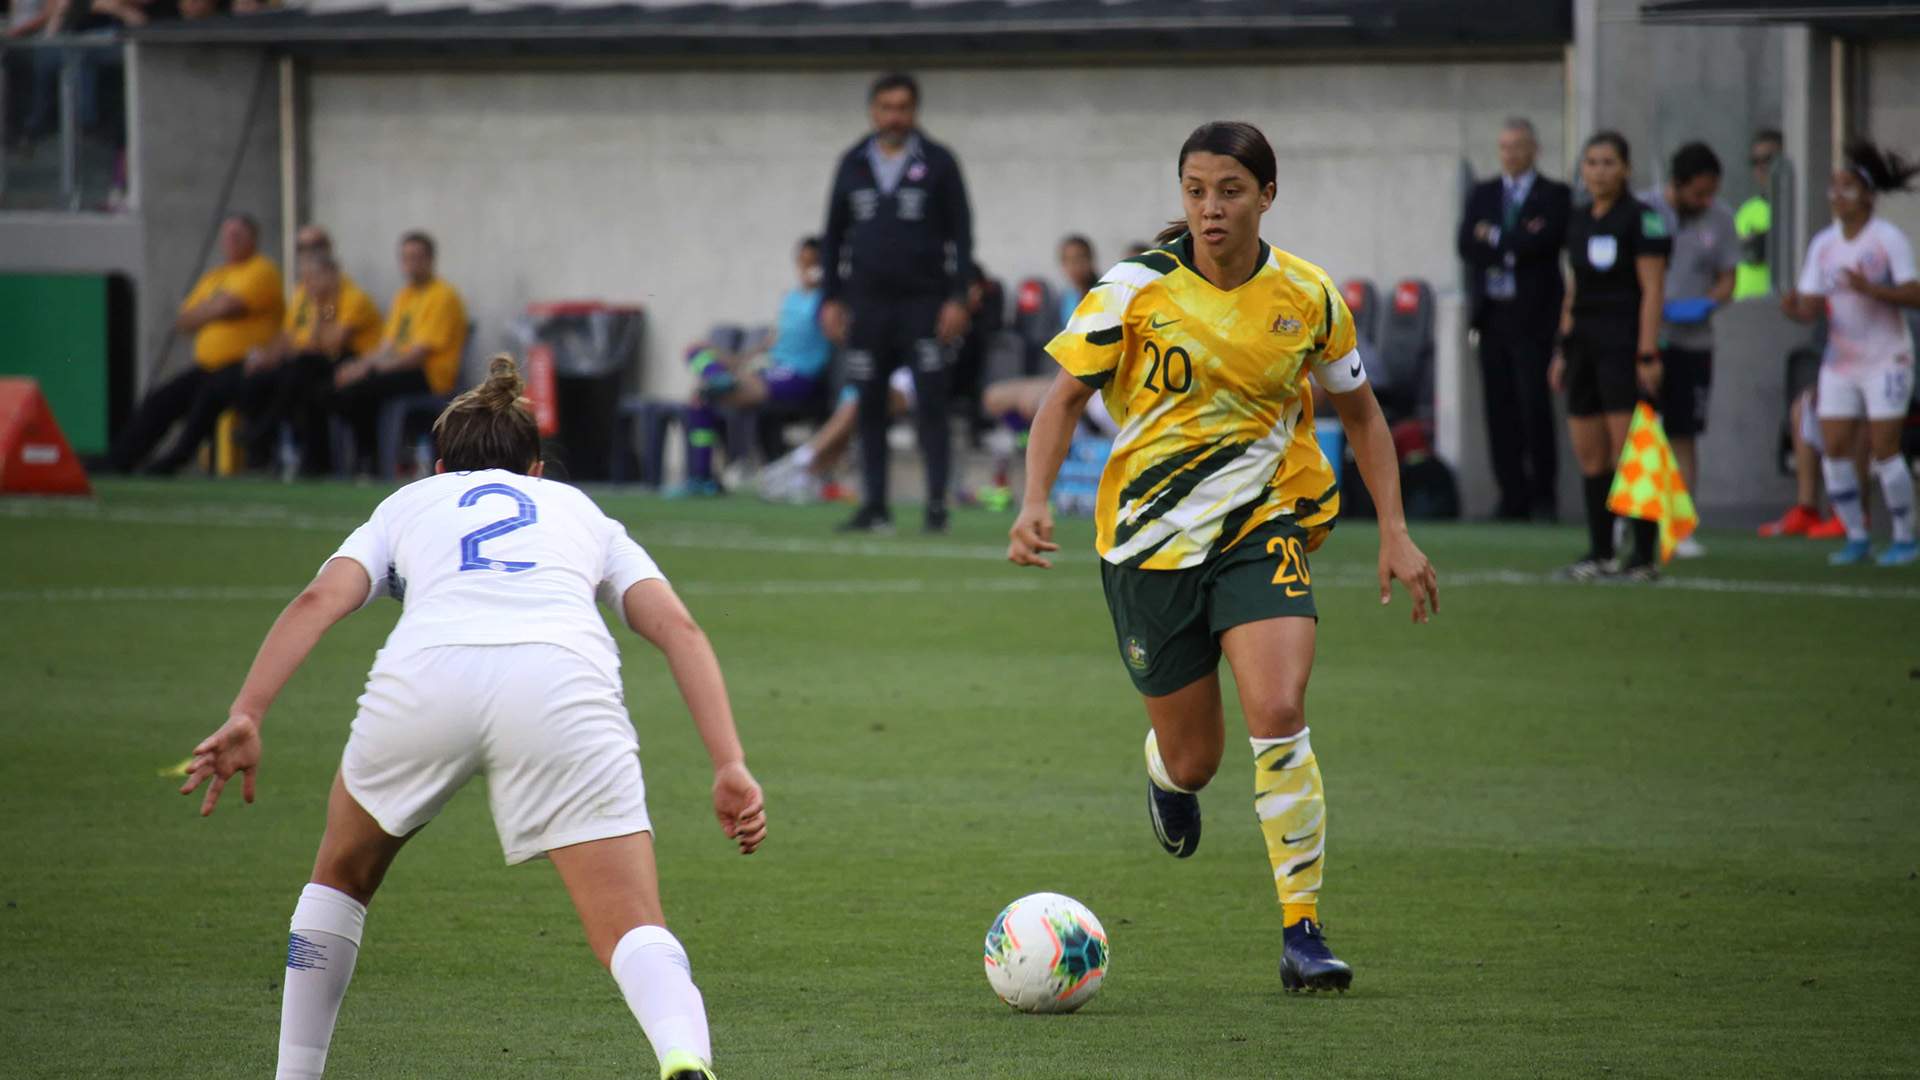 The Matildas' World Cup Match Against England Will Screen Live in King George Square